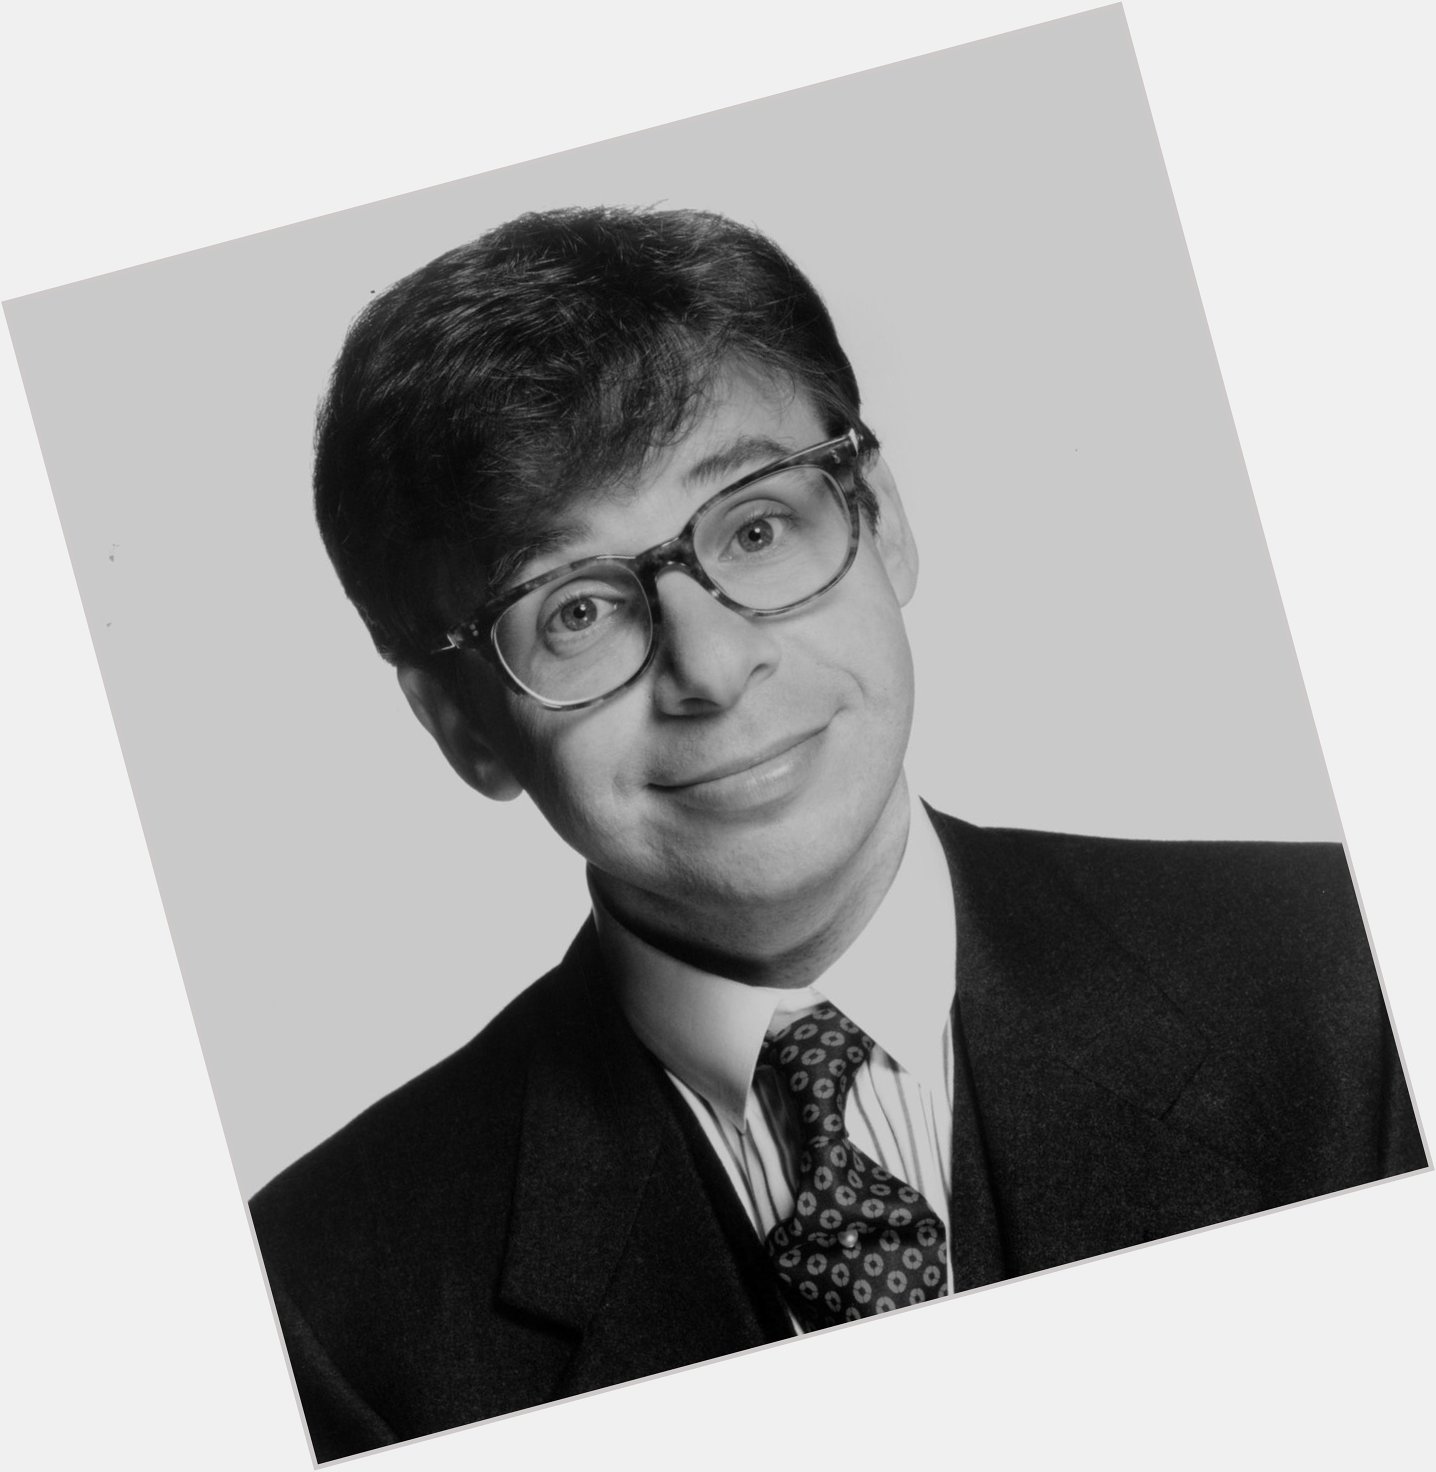 Happy Birthday to Rick Moranis! 

What first comes to mind when you see his picture? 